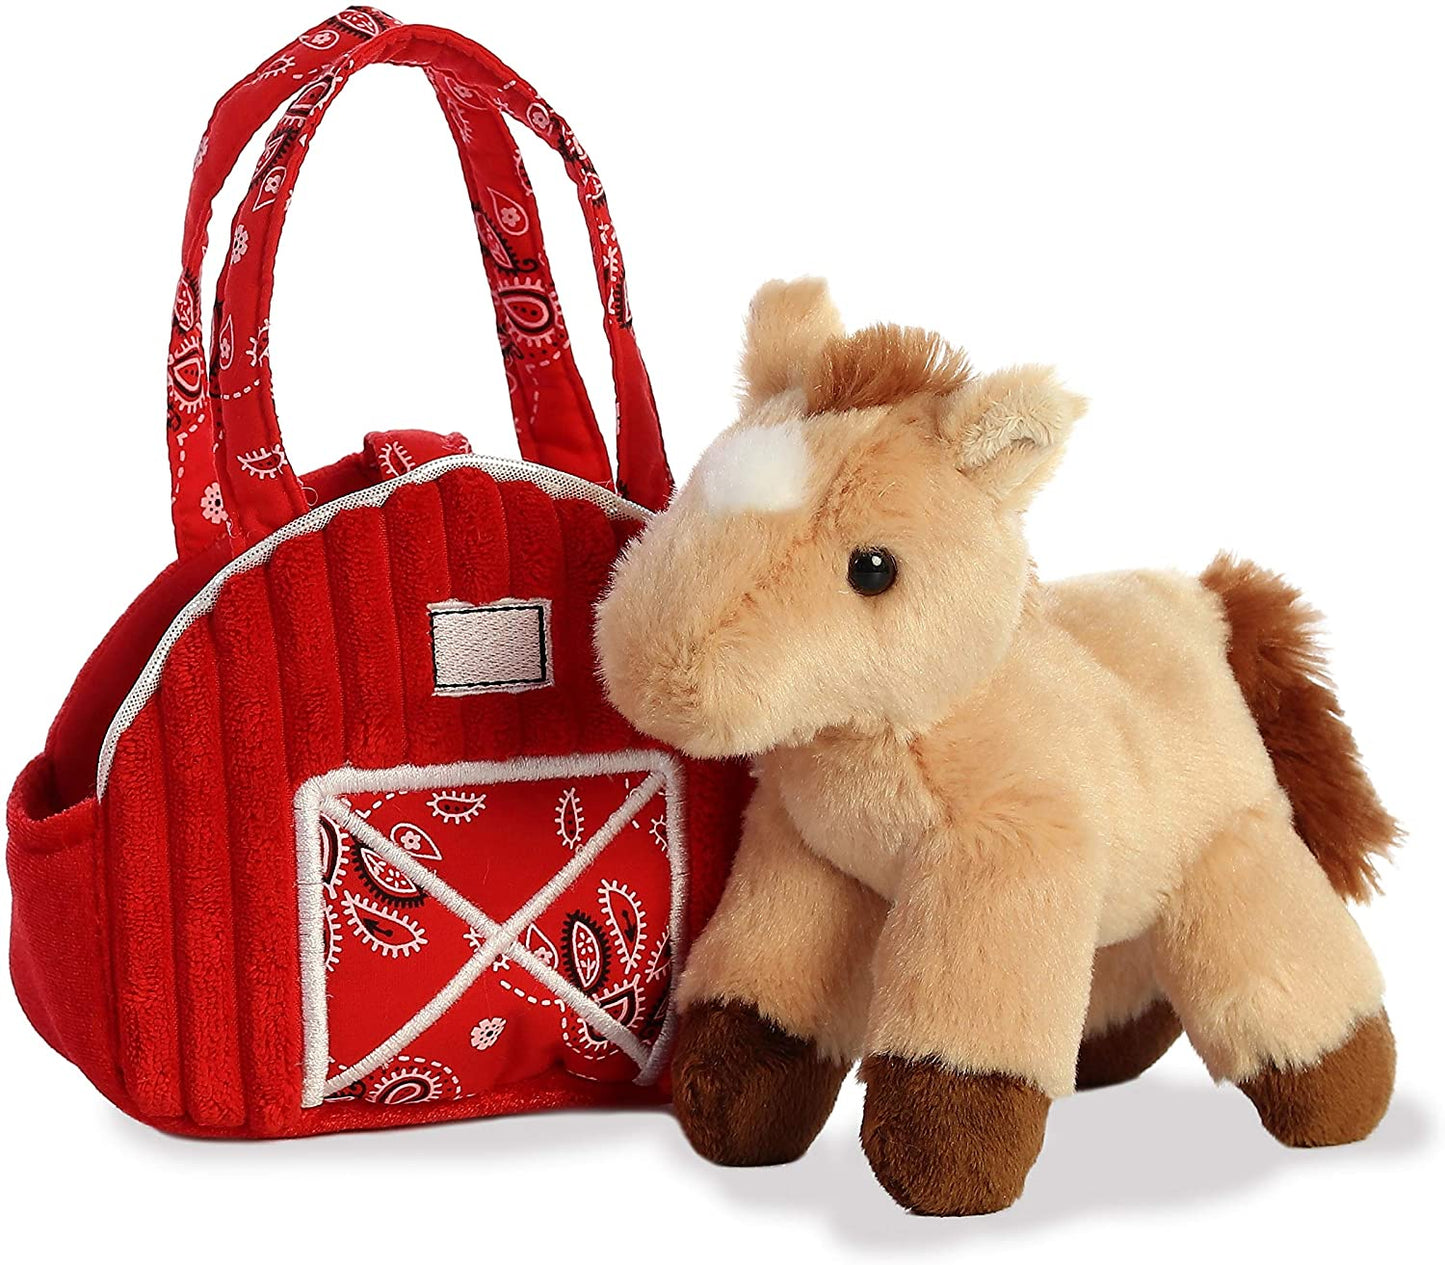 RED BARN PURSE WITH HORSE